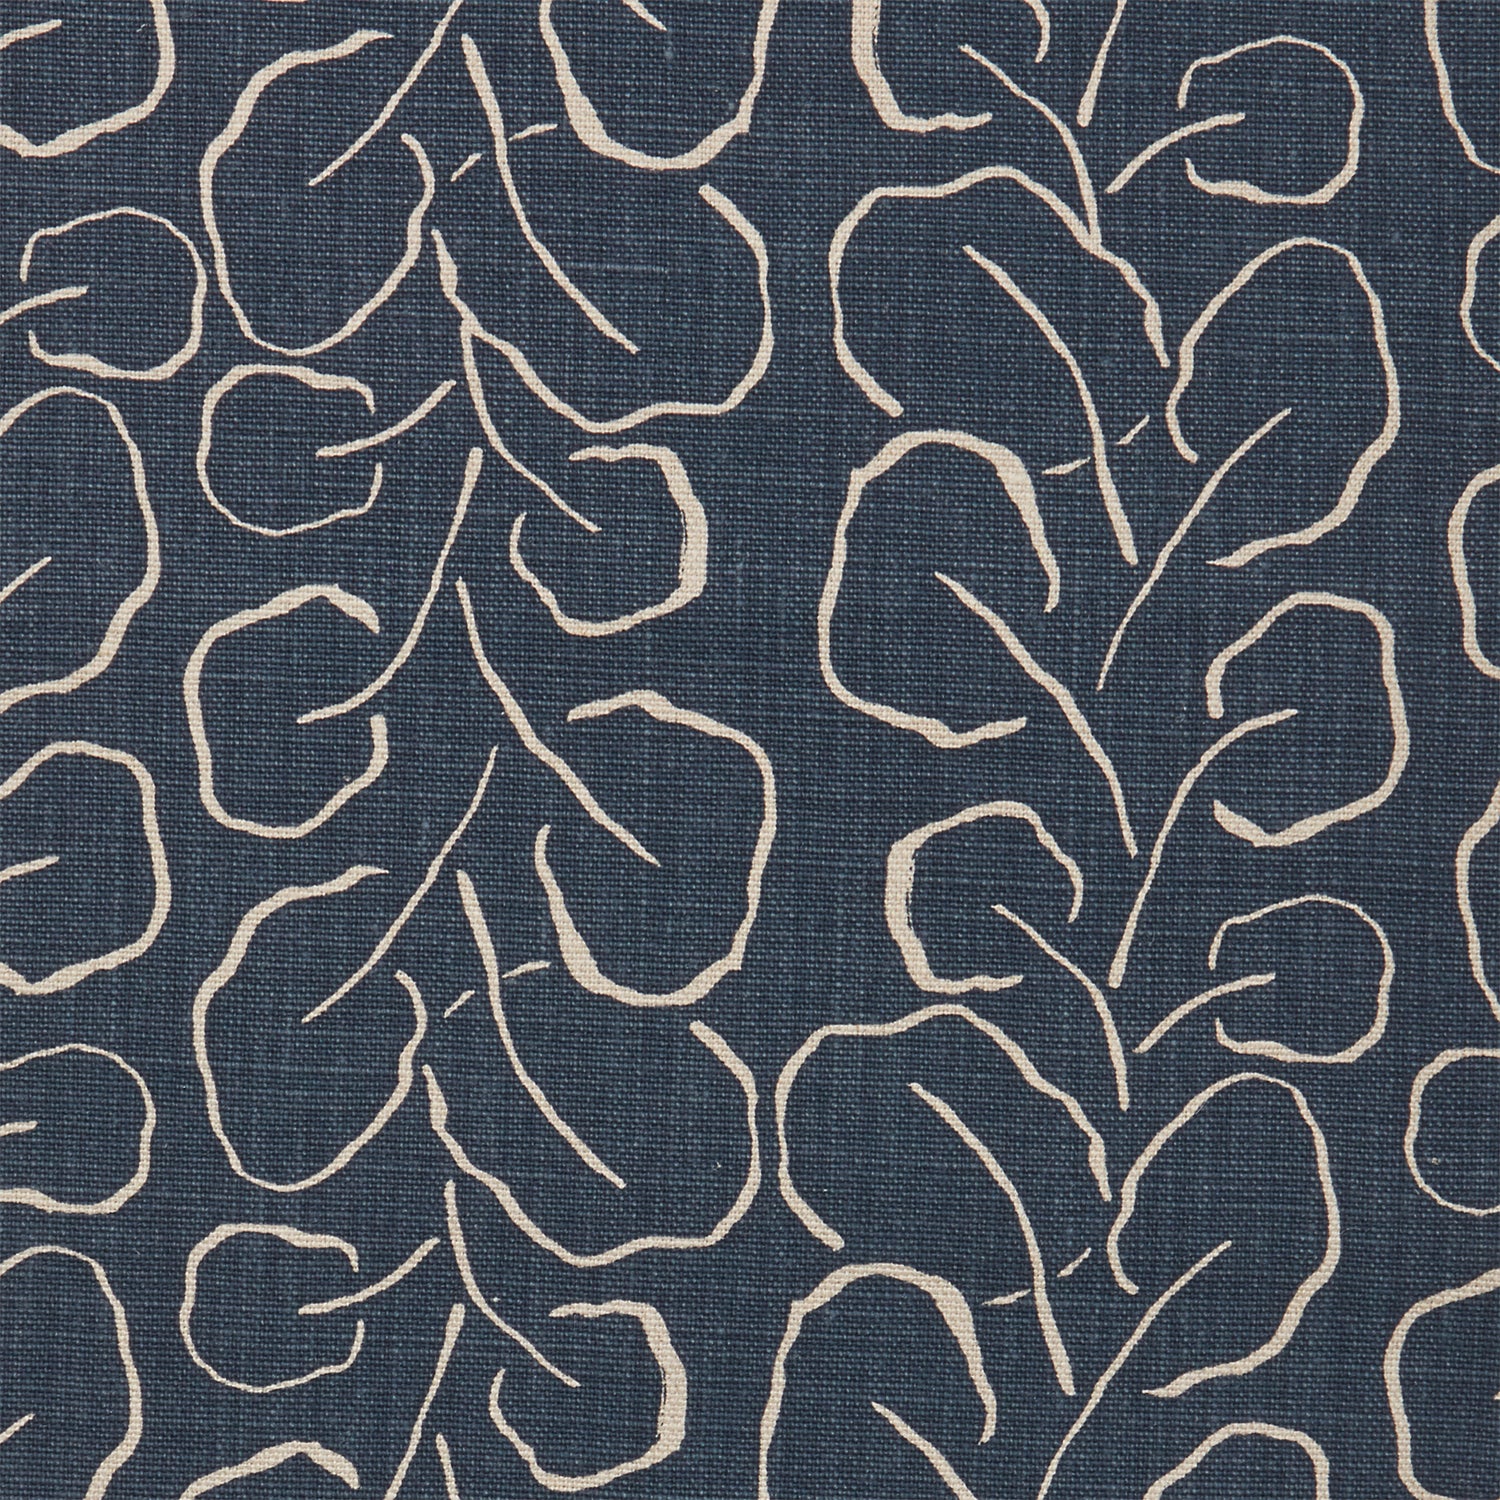 Woven fabric swatch with a large-scale repeating leaf print in tan on a navy blue background.